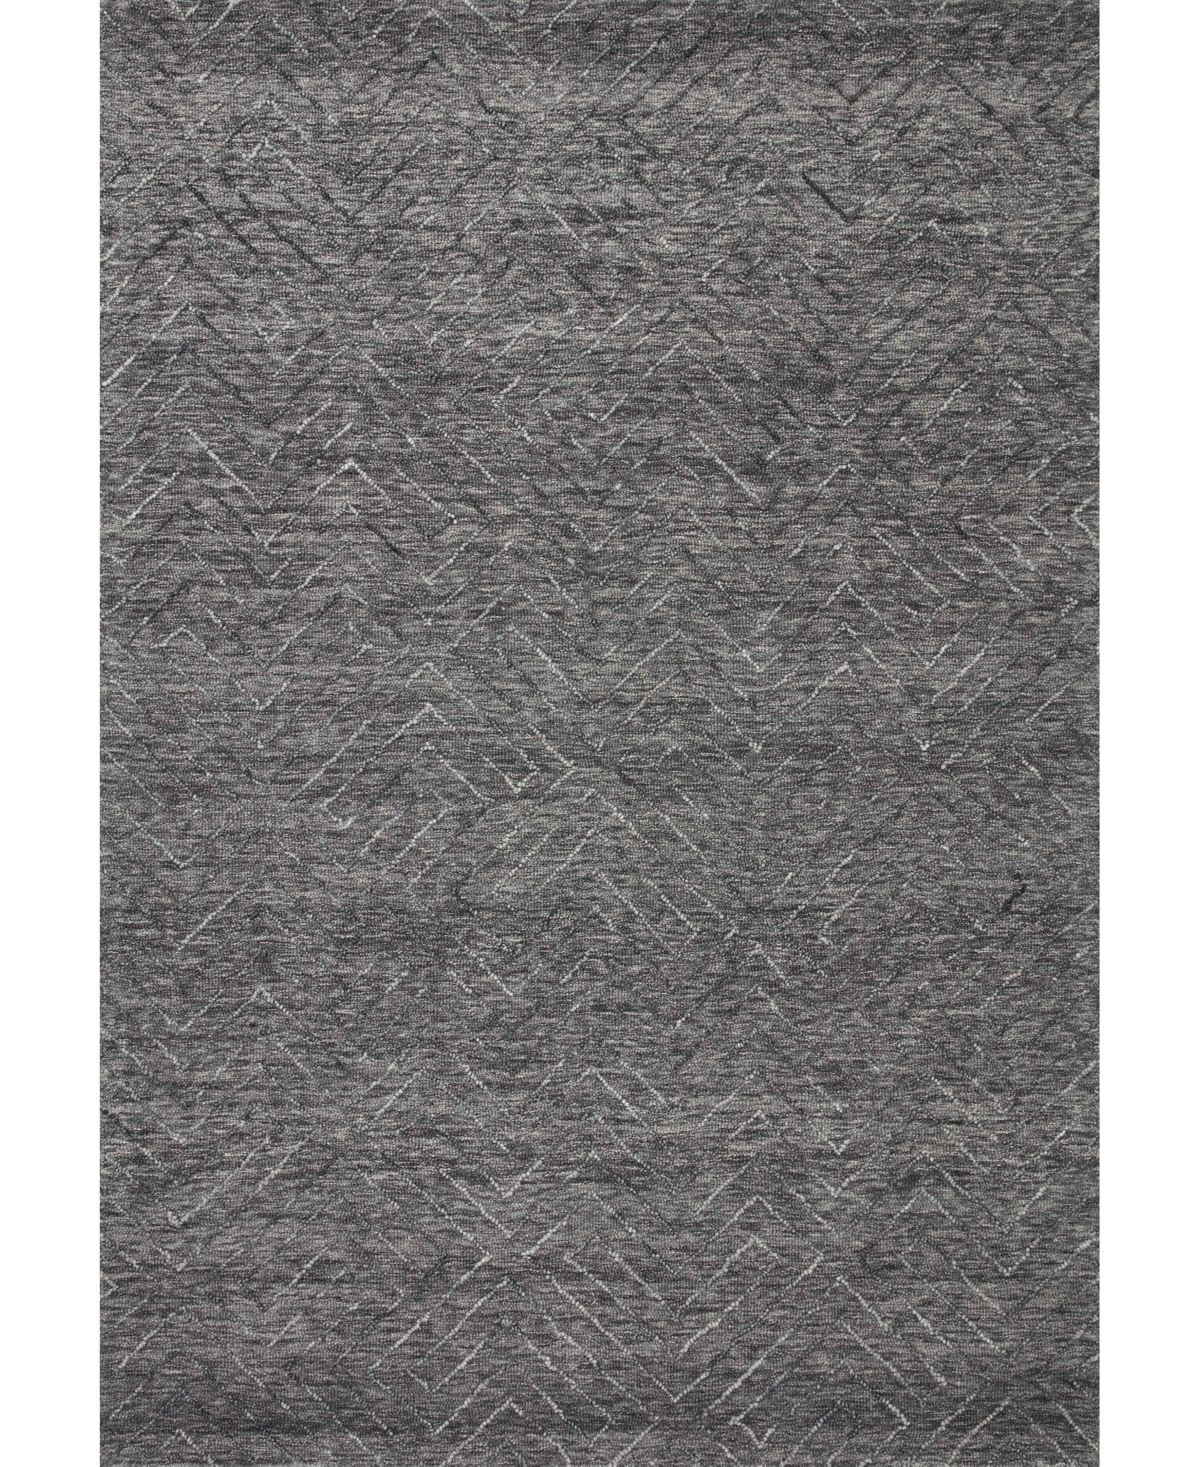 Magnolia Home By Joanna Gaines X Loloi Sarah Sar-03 8'6" X 12' Area Rug In Charcoal